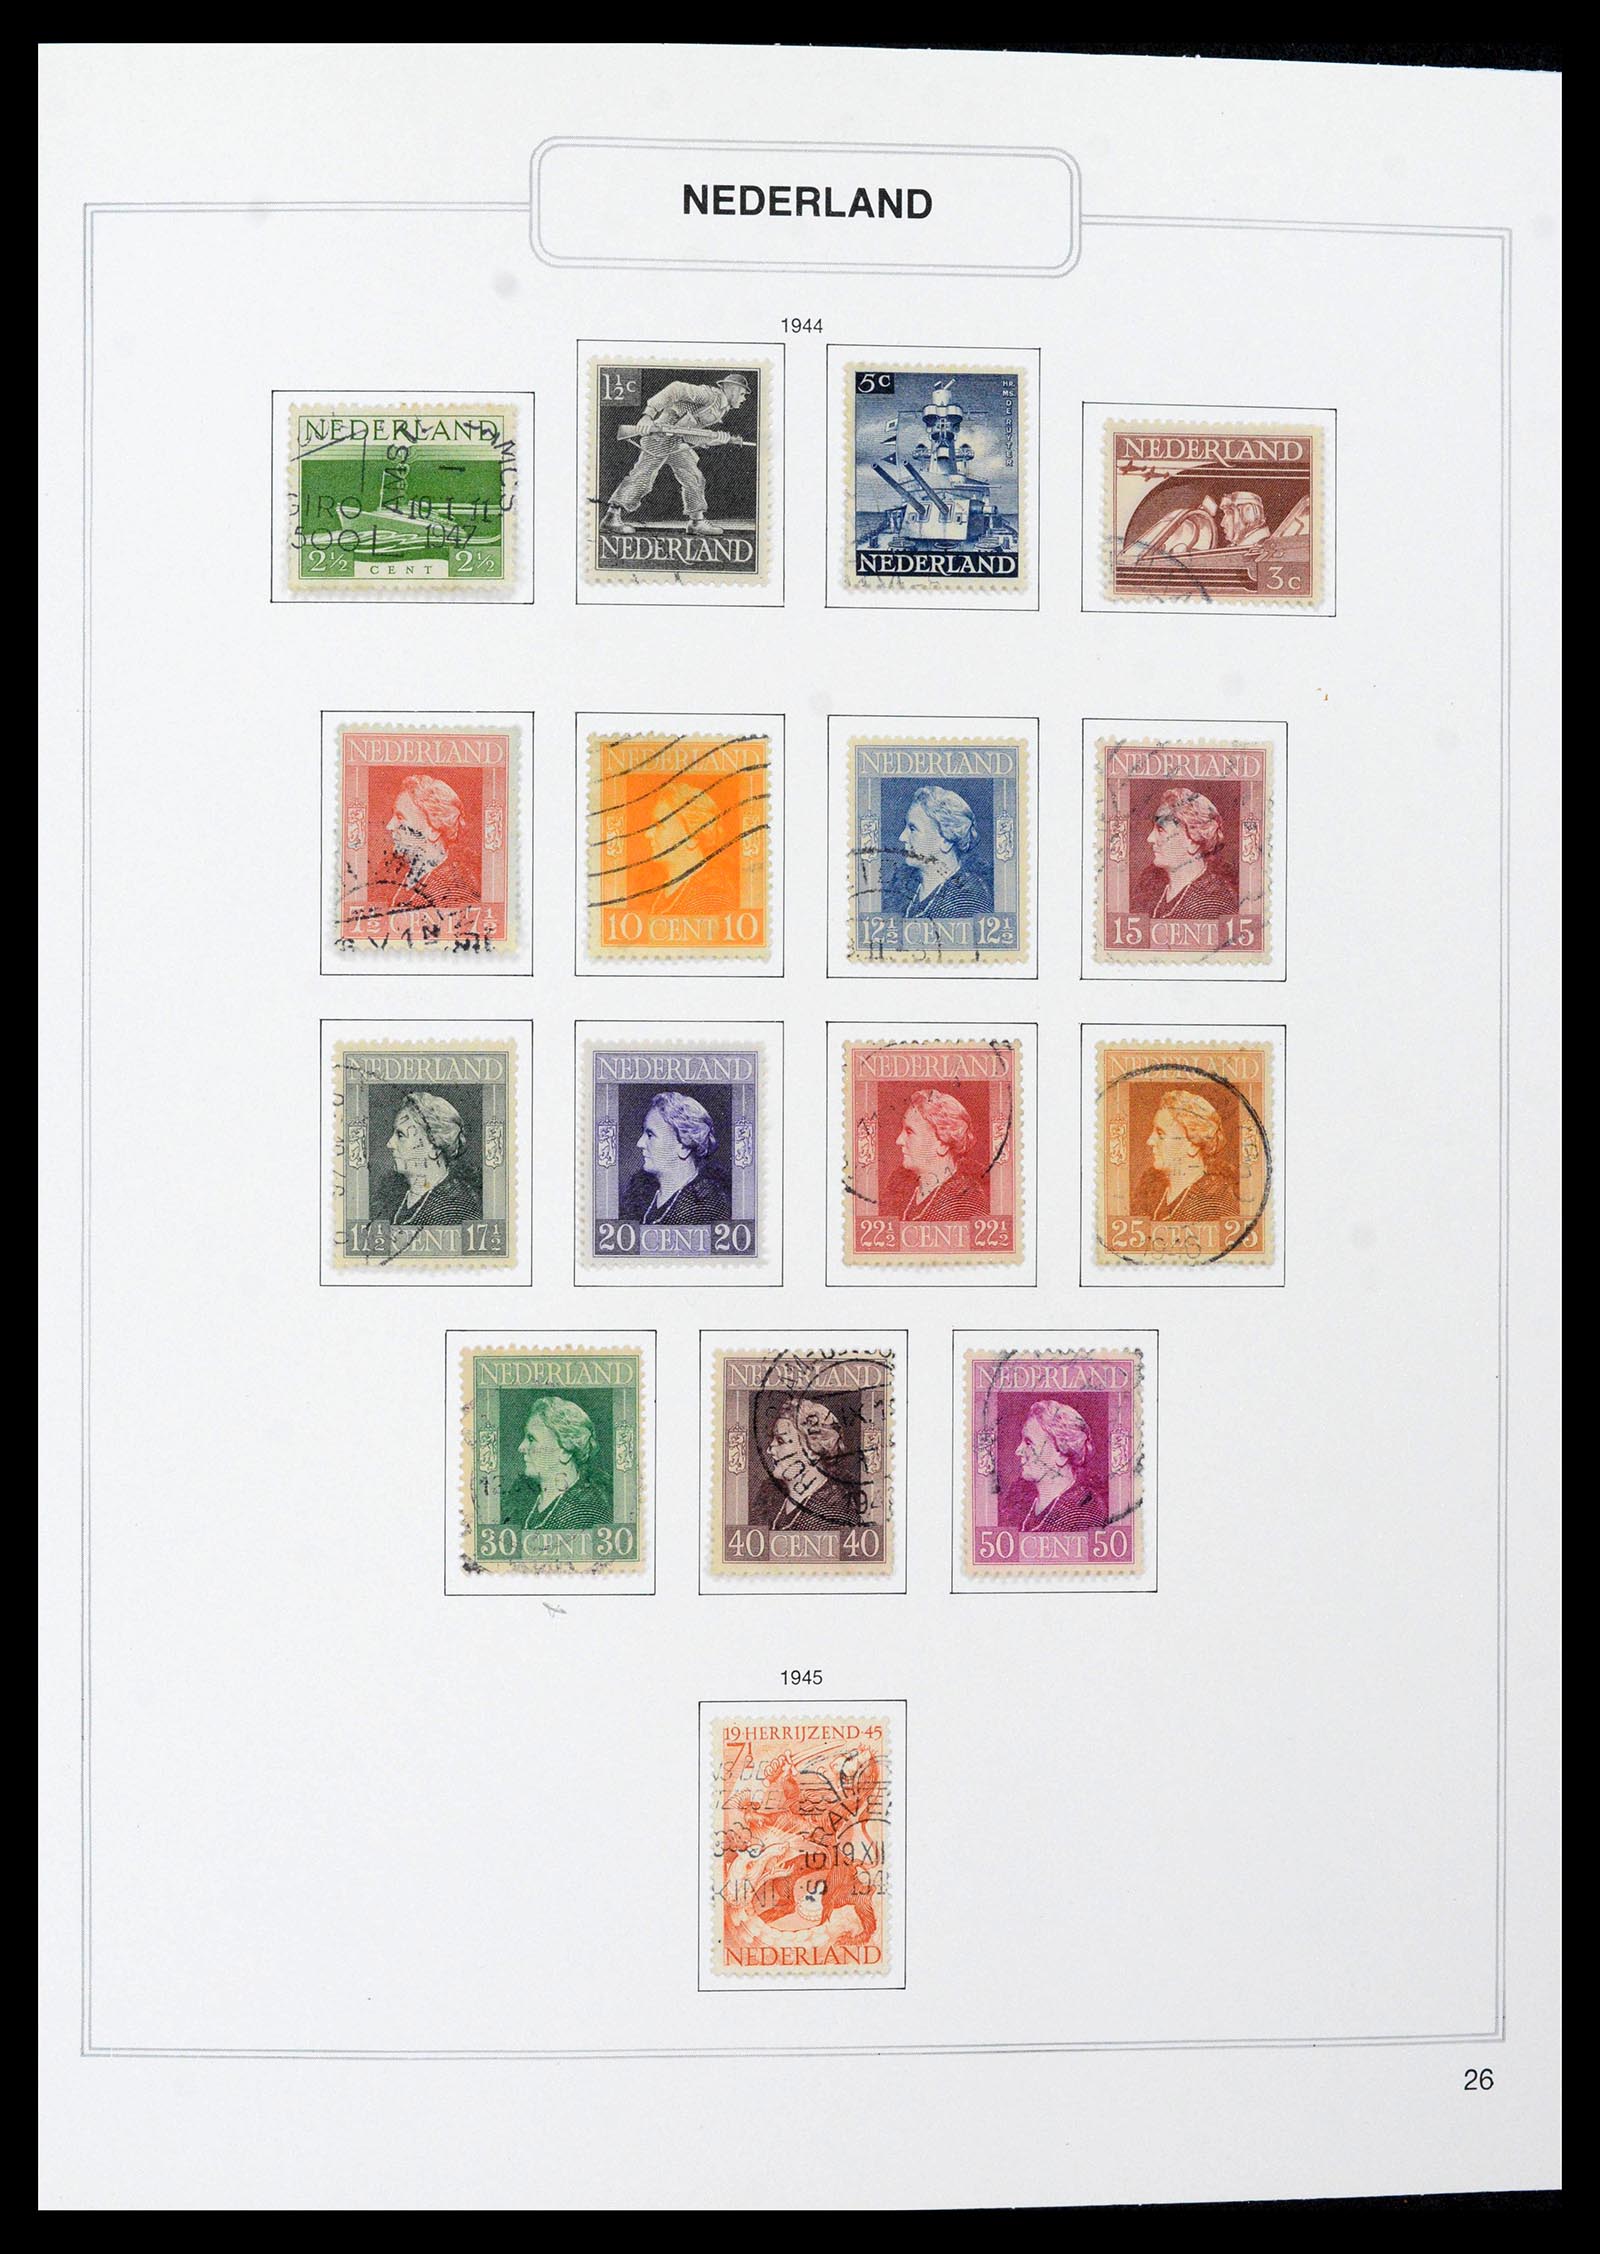 39261 0026 - Stamp collection 39261 Netherlands 1852-2015.